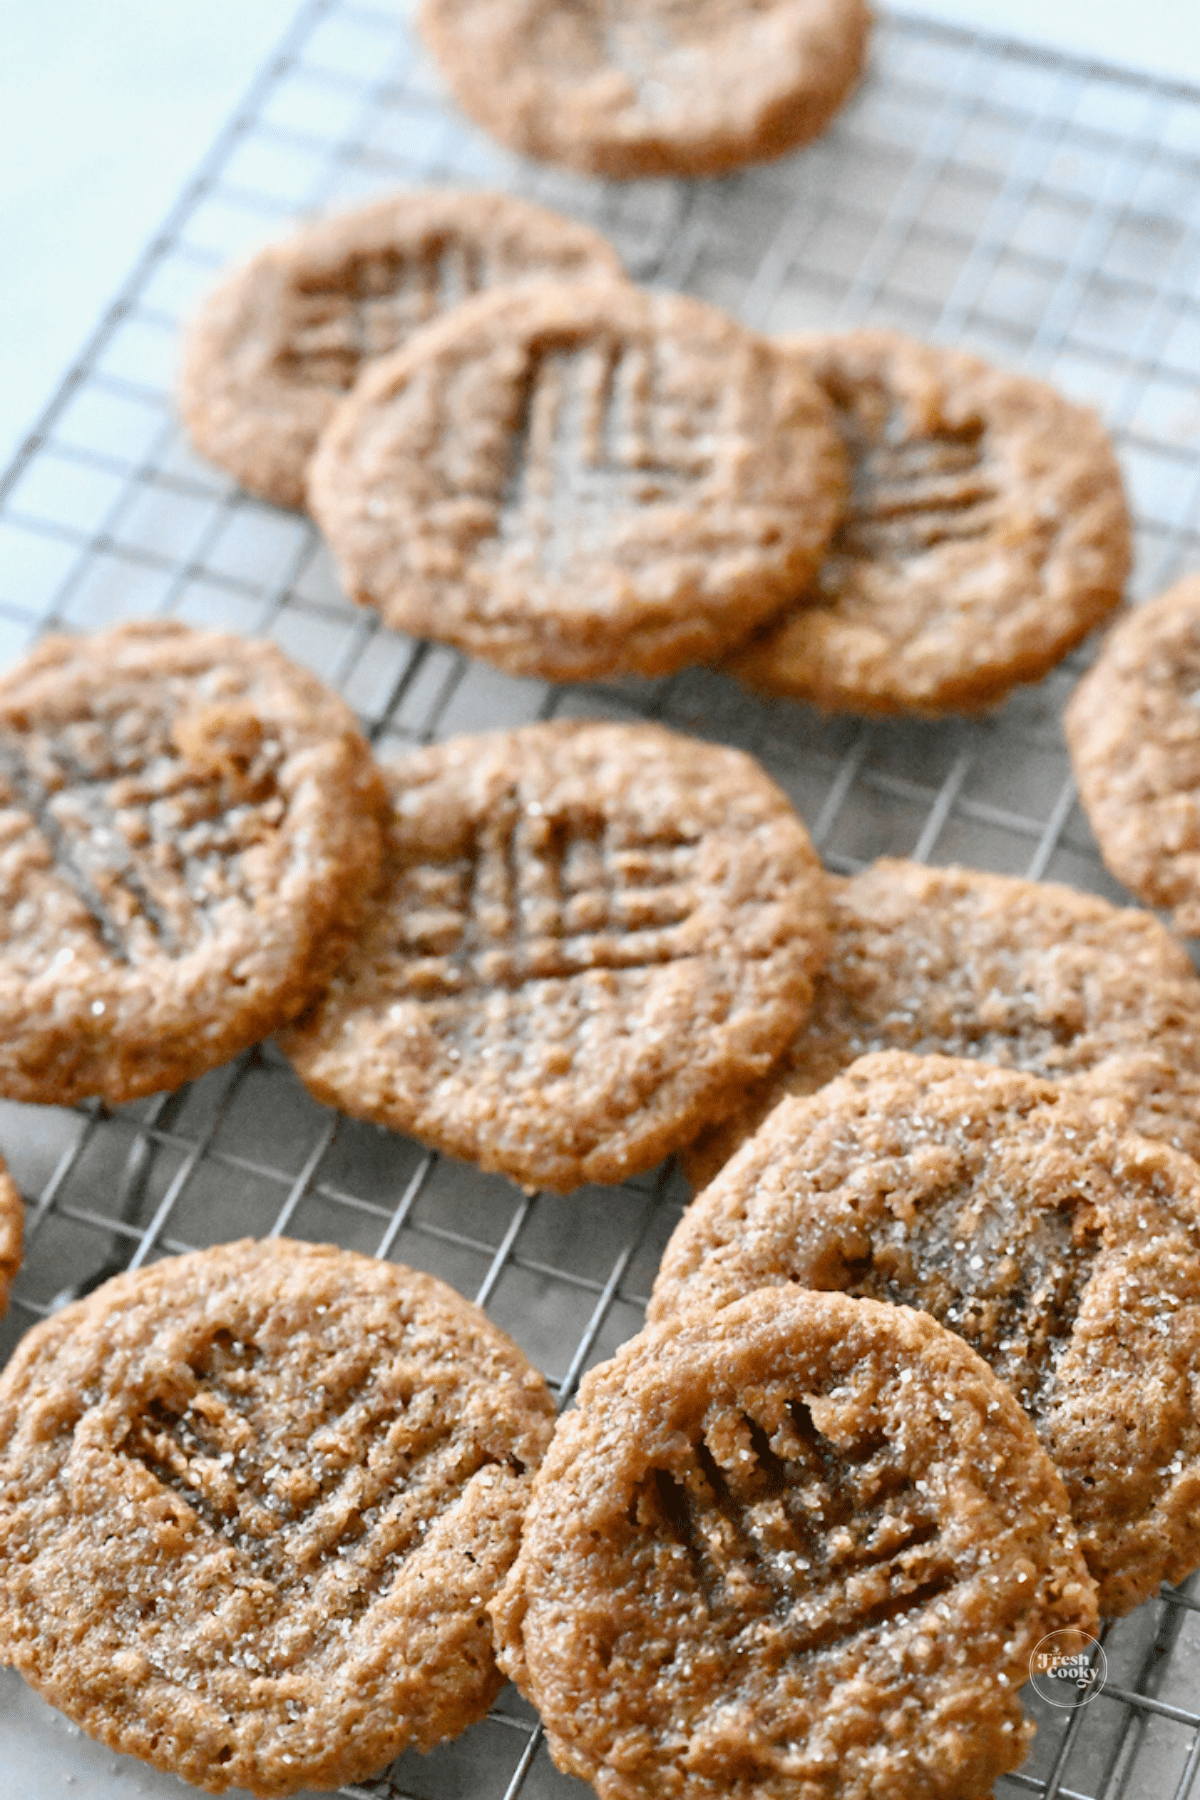 Baked peanut butter cookies using natural peanut butter and cane sugar. 